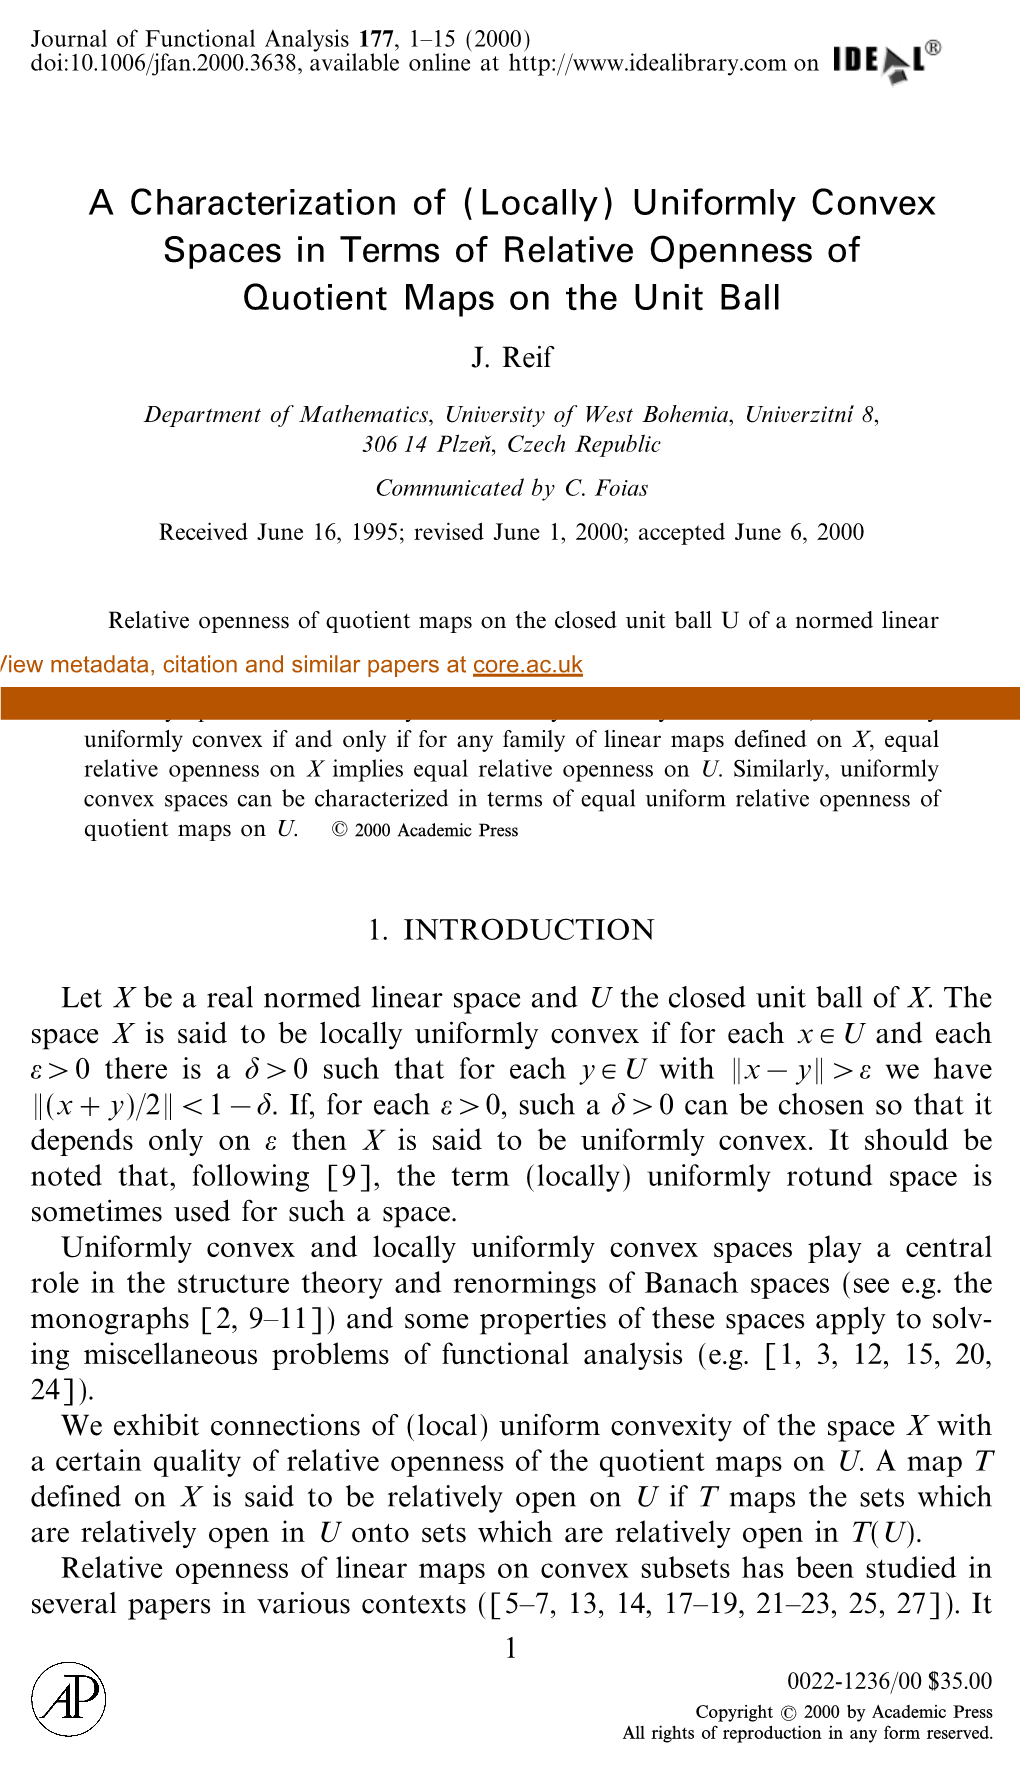 Uniformly Convex Spaces in Terms of Relative Openness of Quotient Maps on the Unit Ball J